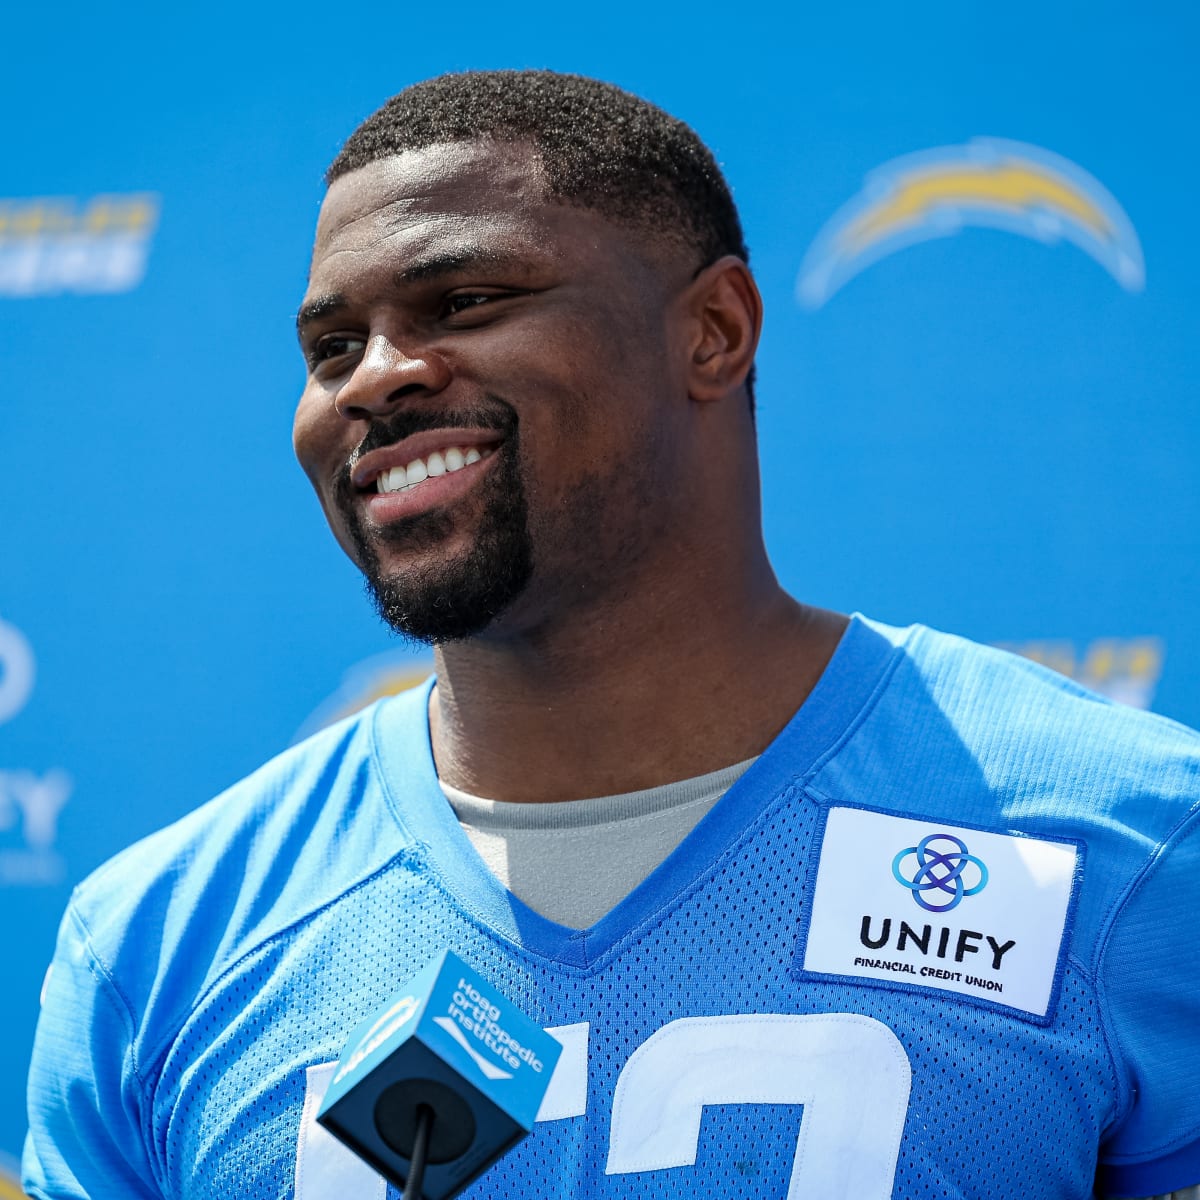 How Chargers star Khalil Mack annihilated his 'soft' reputation